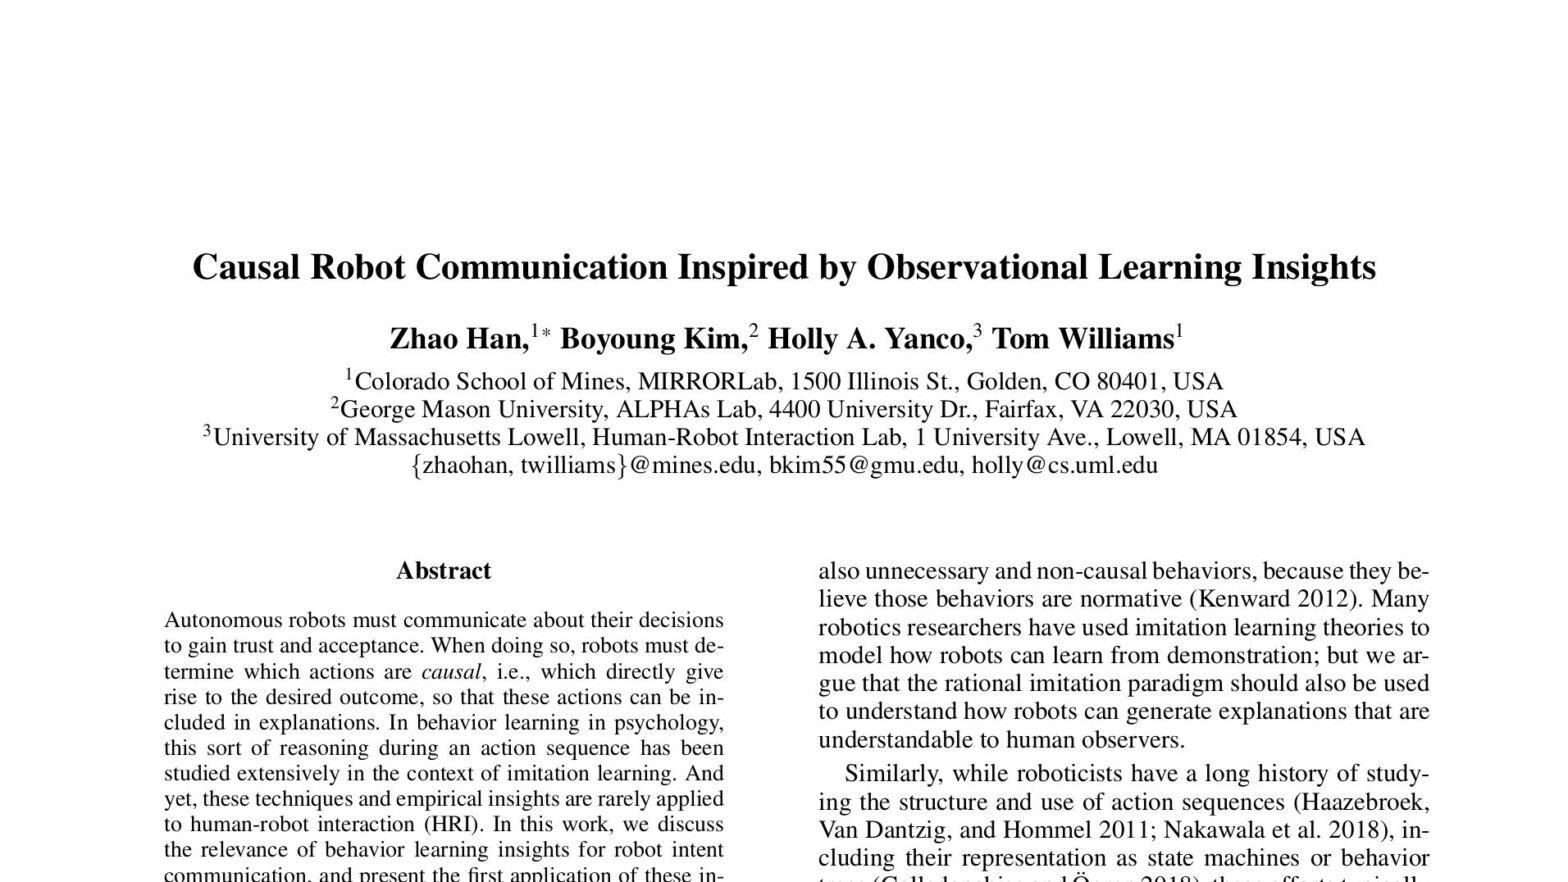 Causal Robot Communication Inspired by Observational Learning Insights